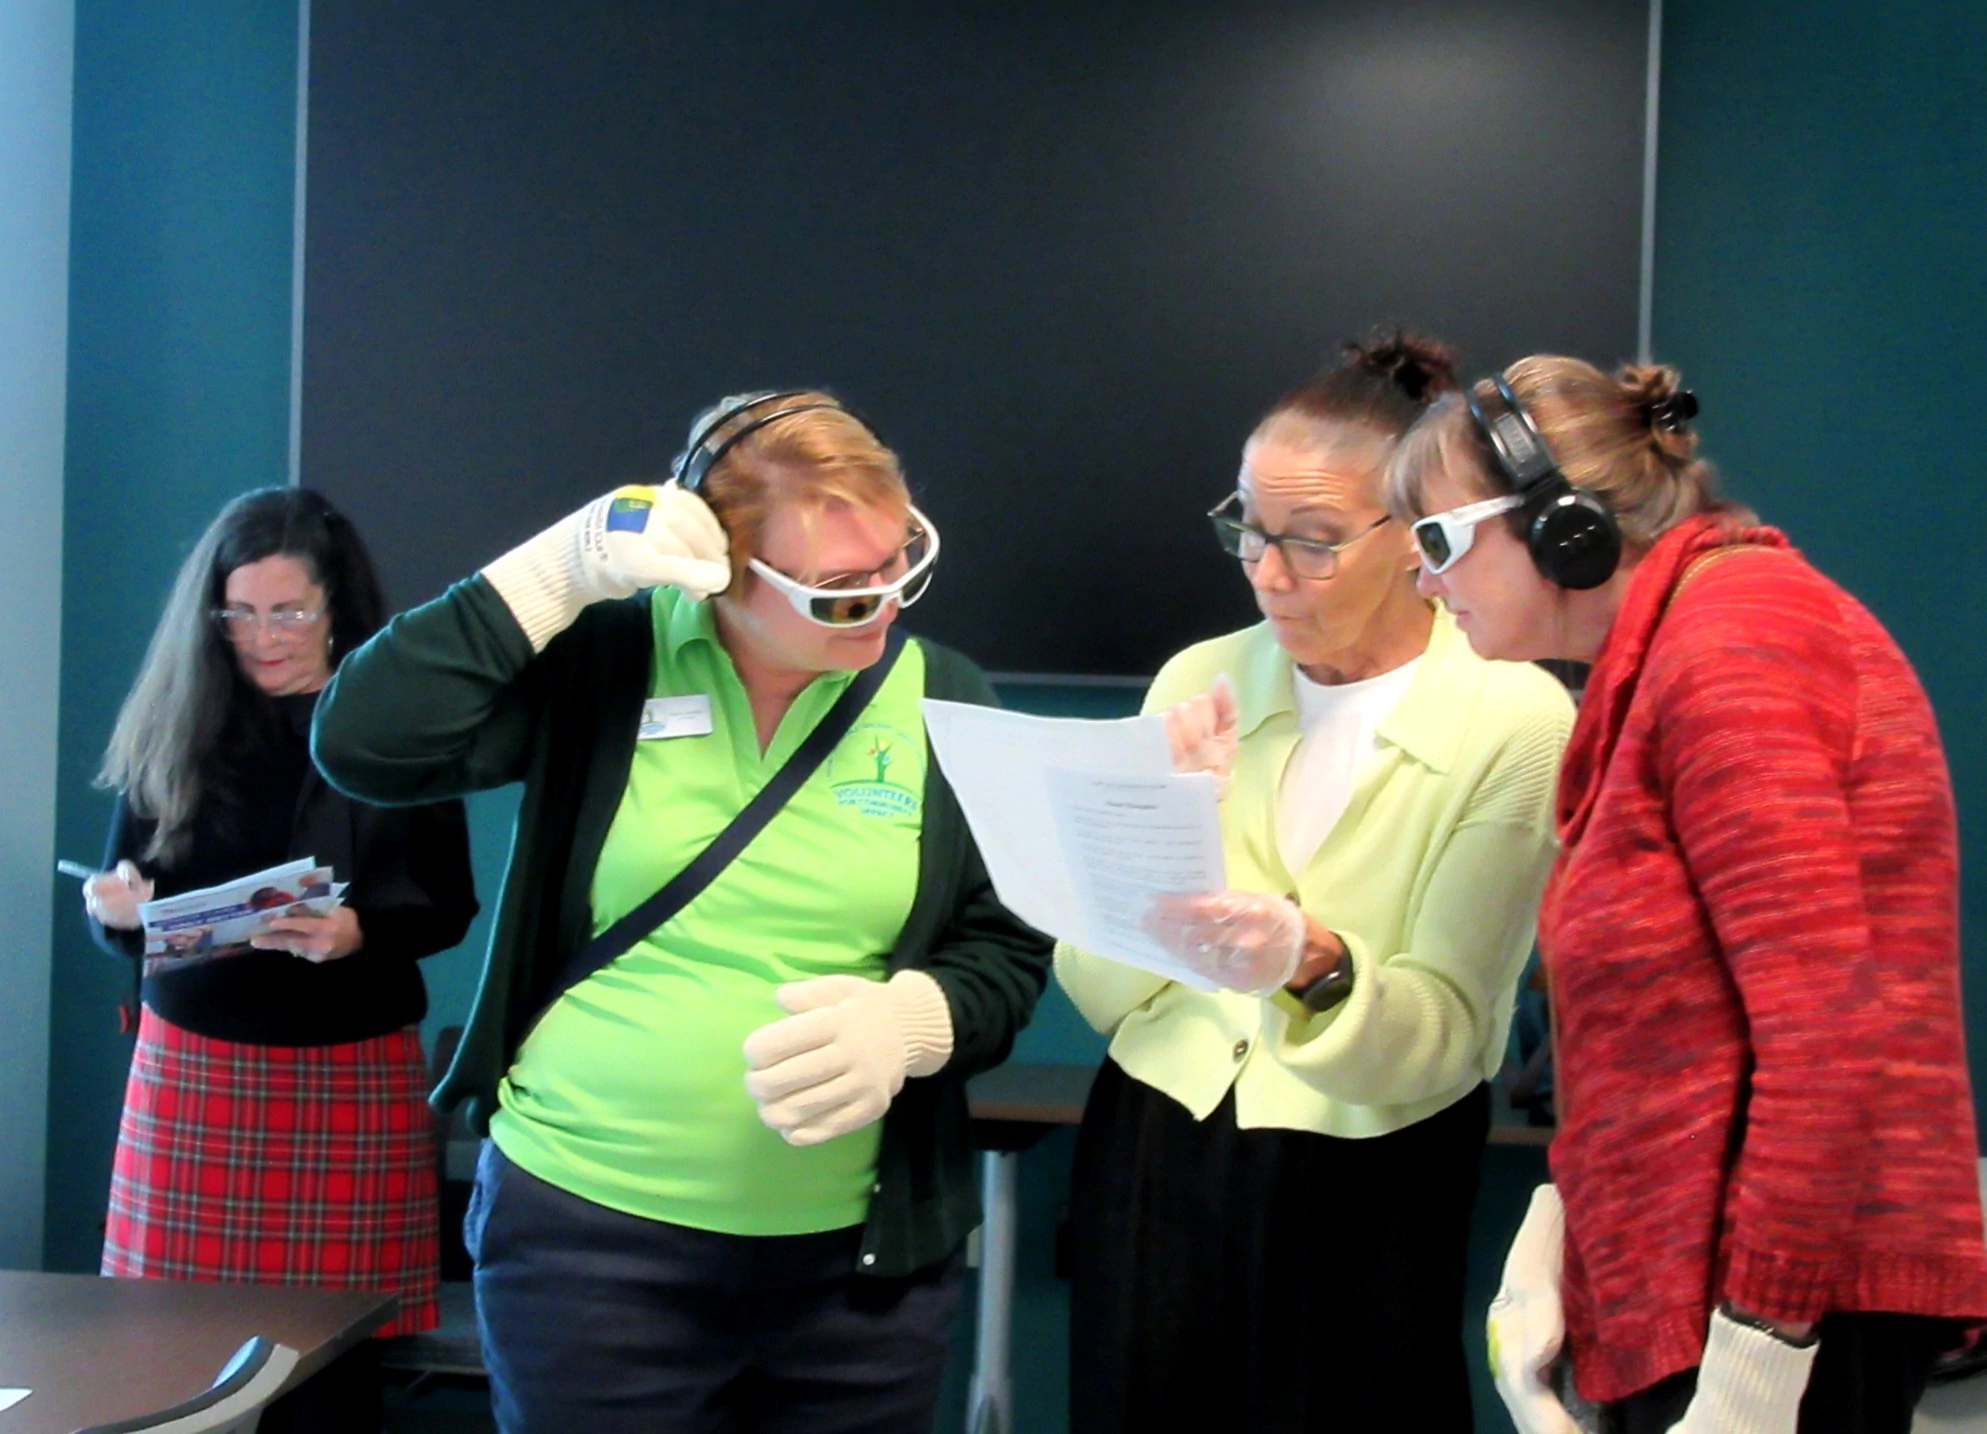 Event participants gather to listen to instructions as they begin their Virtual Dementia Tour® at the AdventHealth Innovation Tower in Orlando, Florida on January 8, 2024.